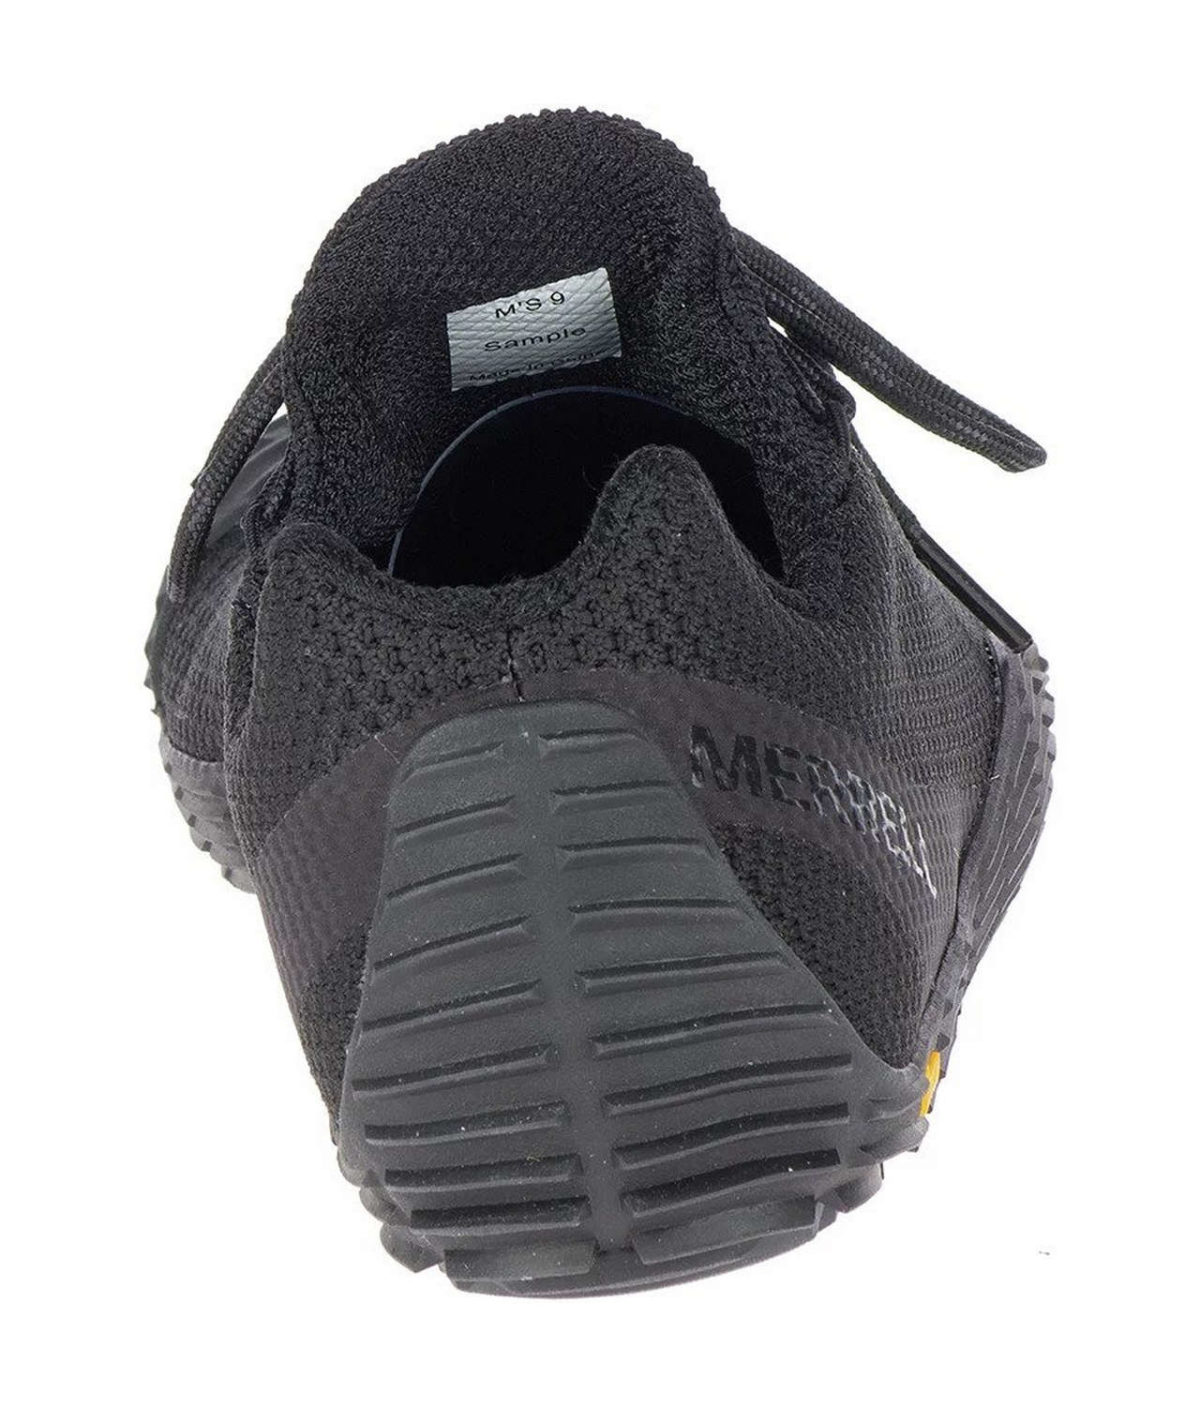 Merrell Move Glove black Fast and Light 08